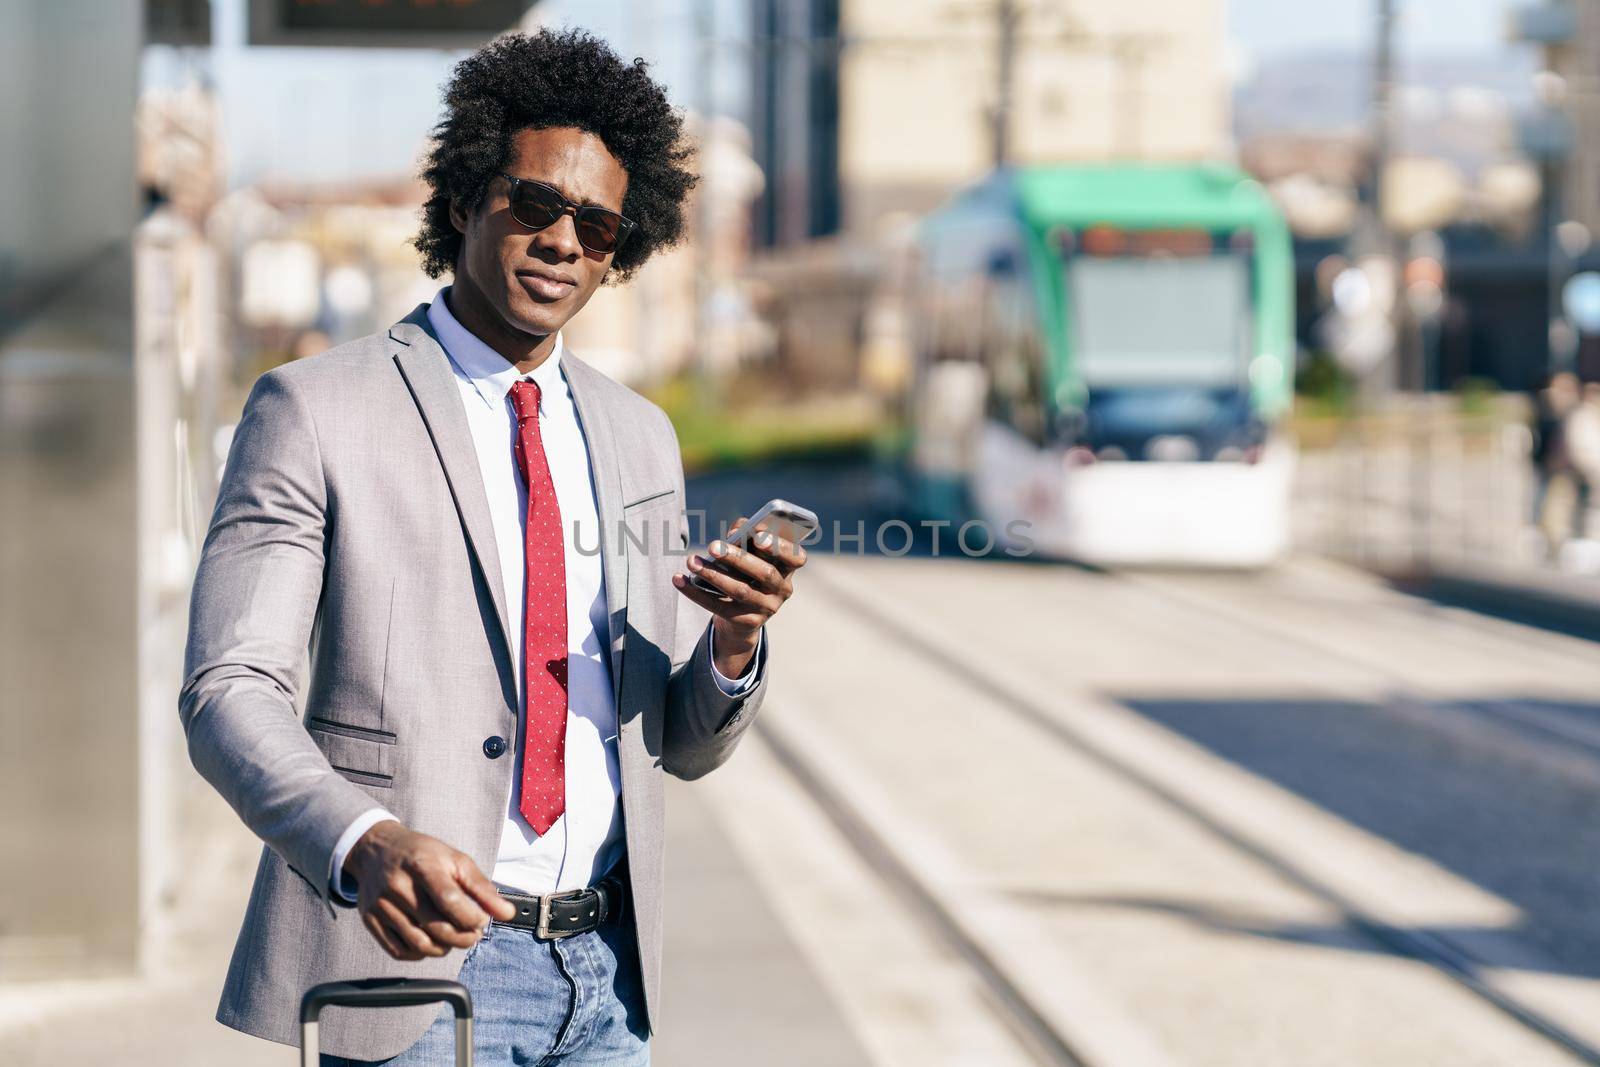 Black Businessman waiting for the next train. Man with afro hair commuting.